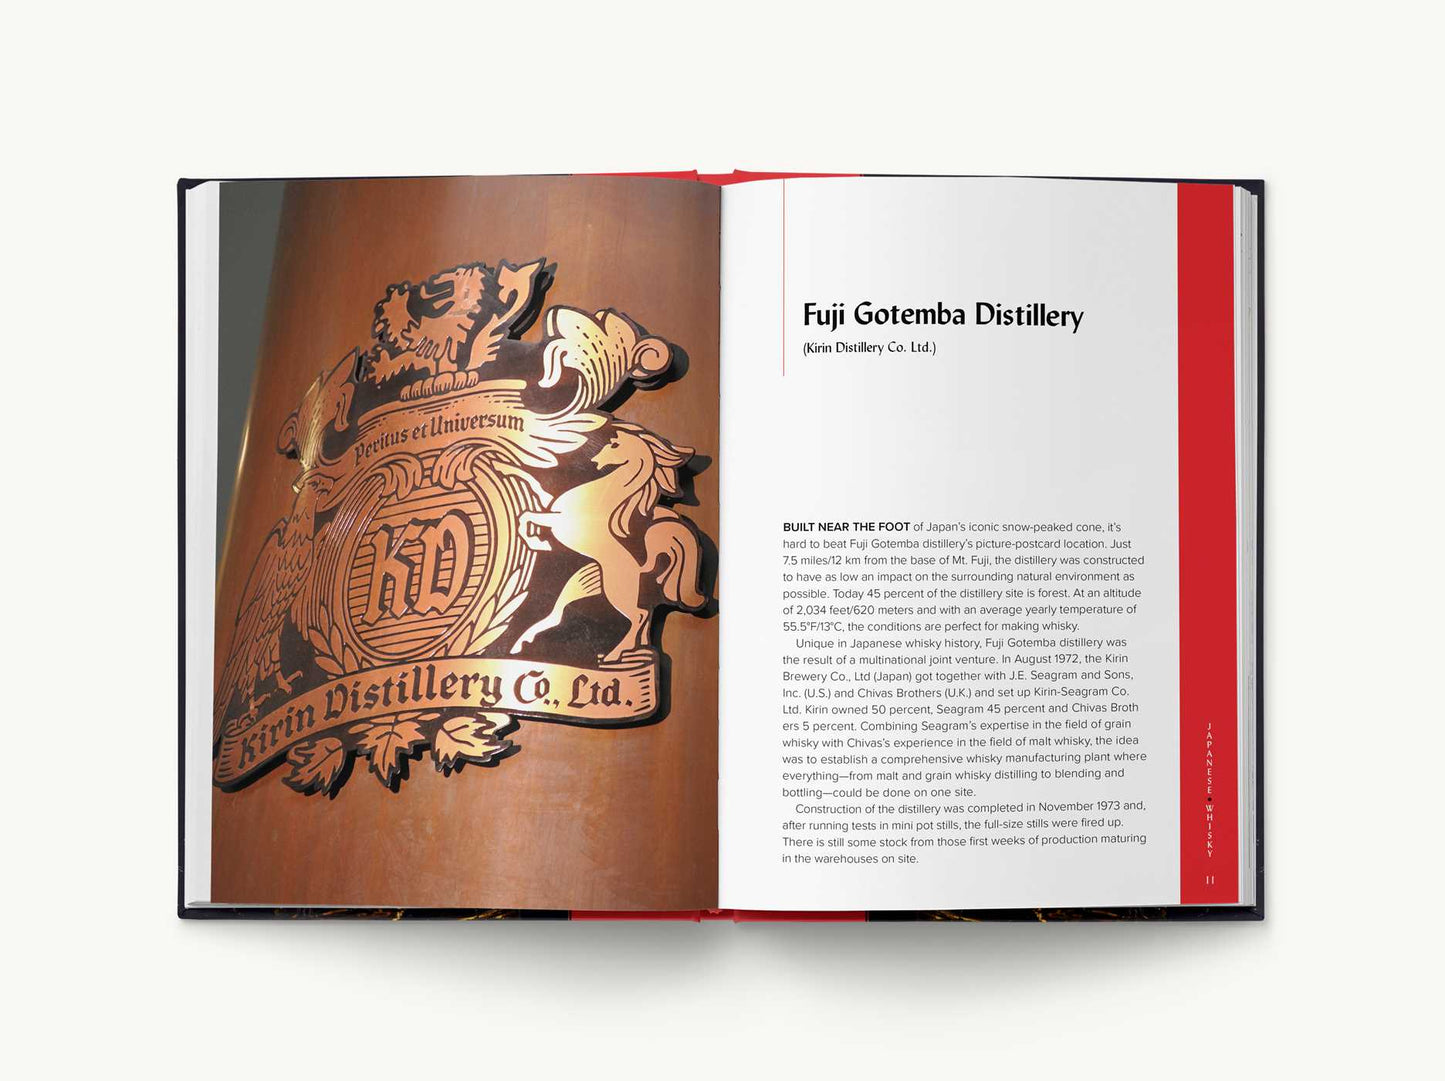 Whisky Rising: The Second Edition: The Definitive Guide to the Finest Japanese Whiskies and Distillers